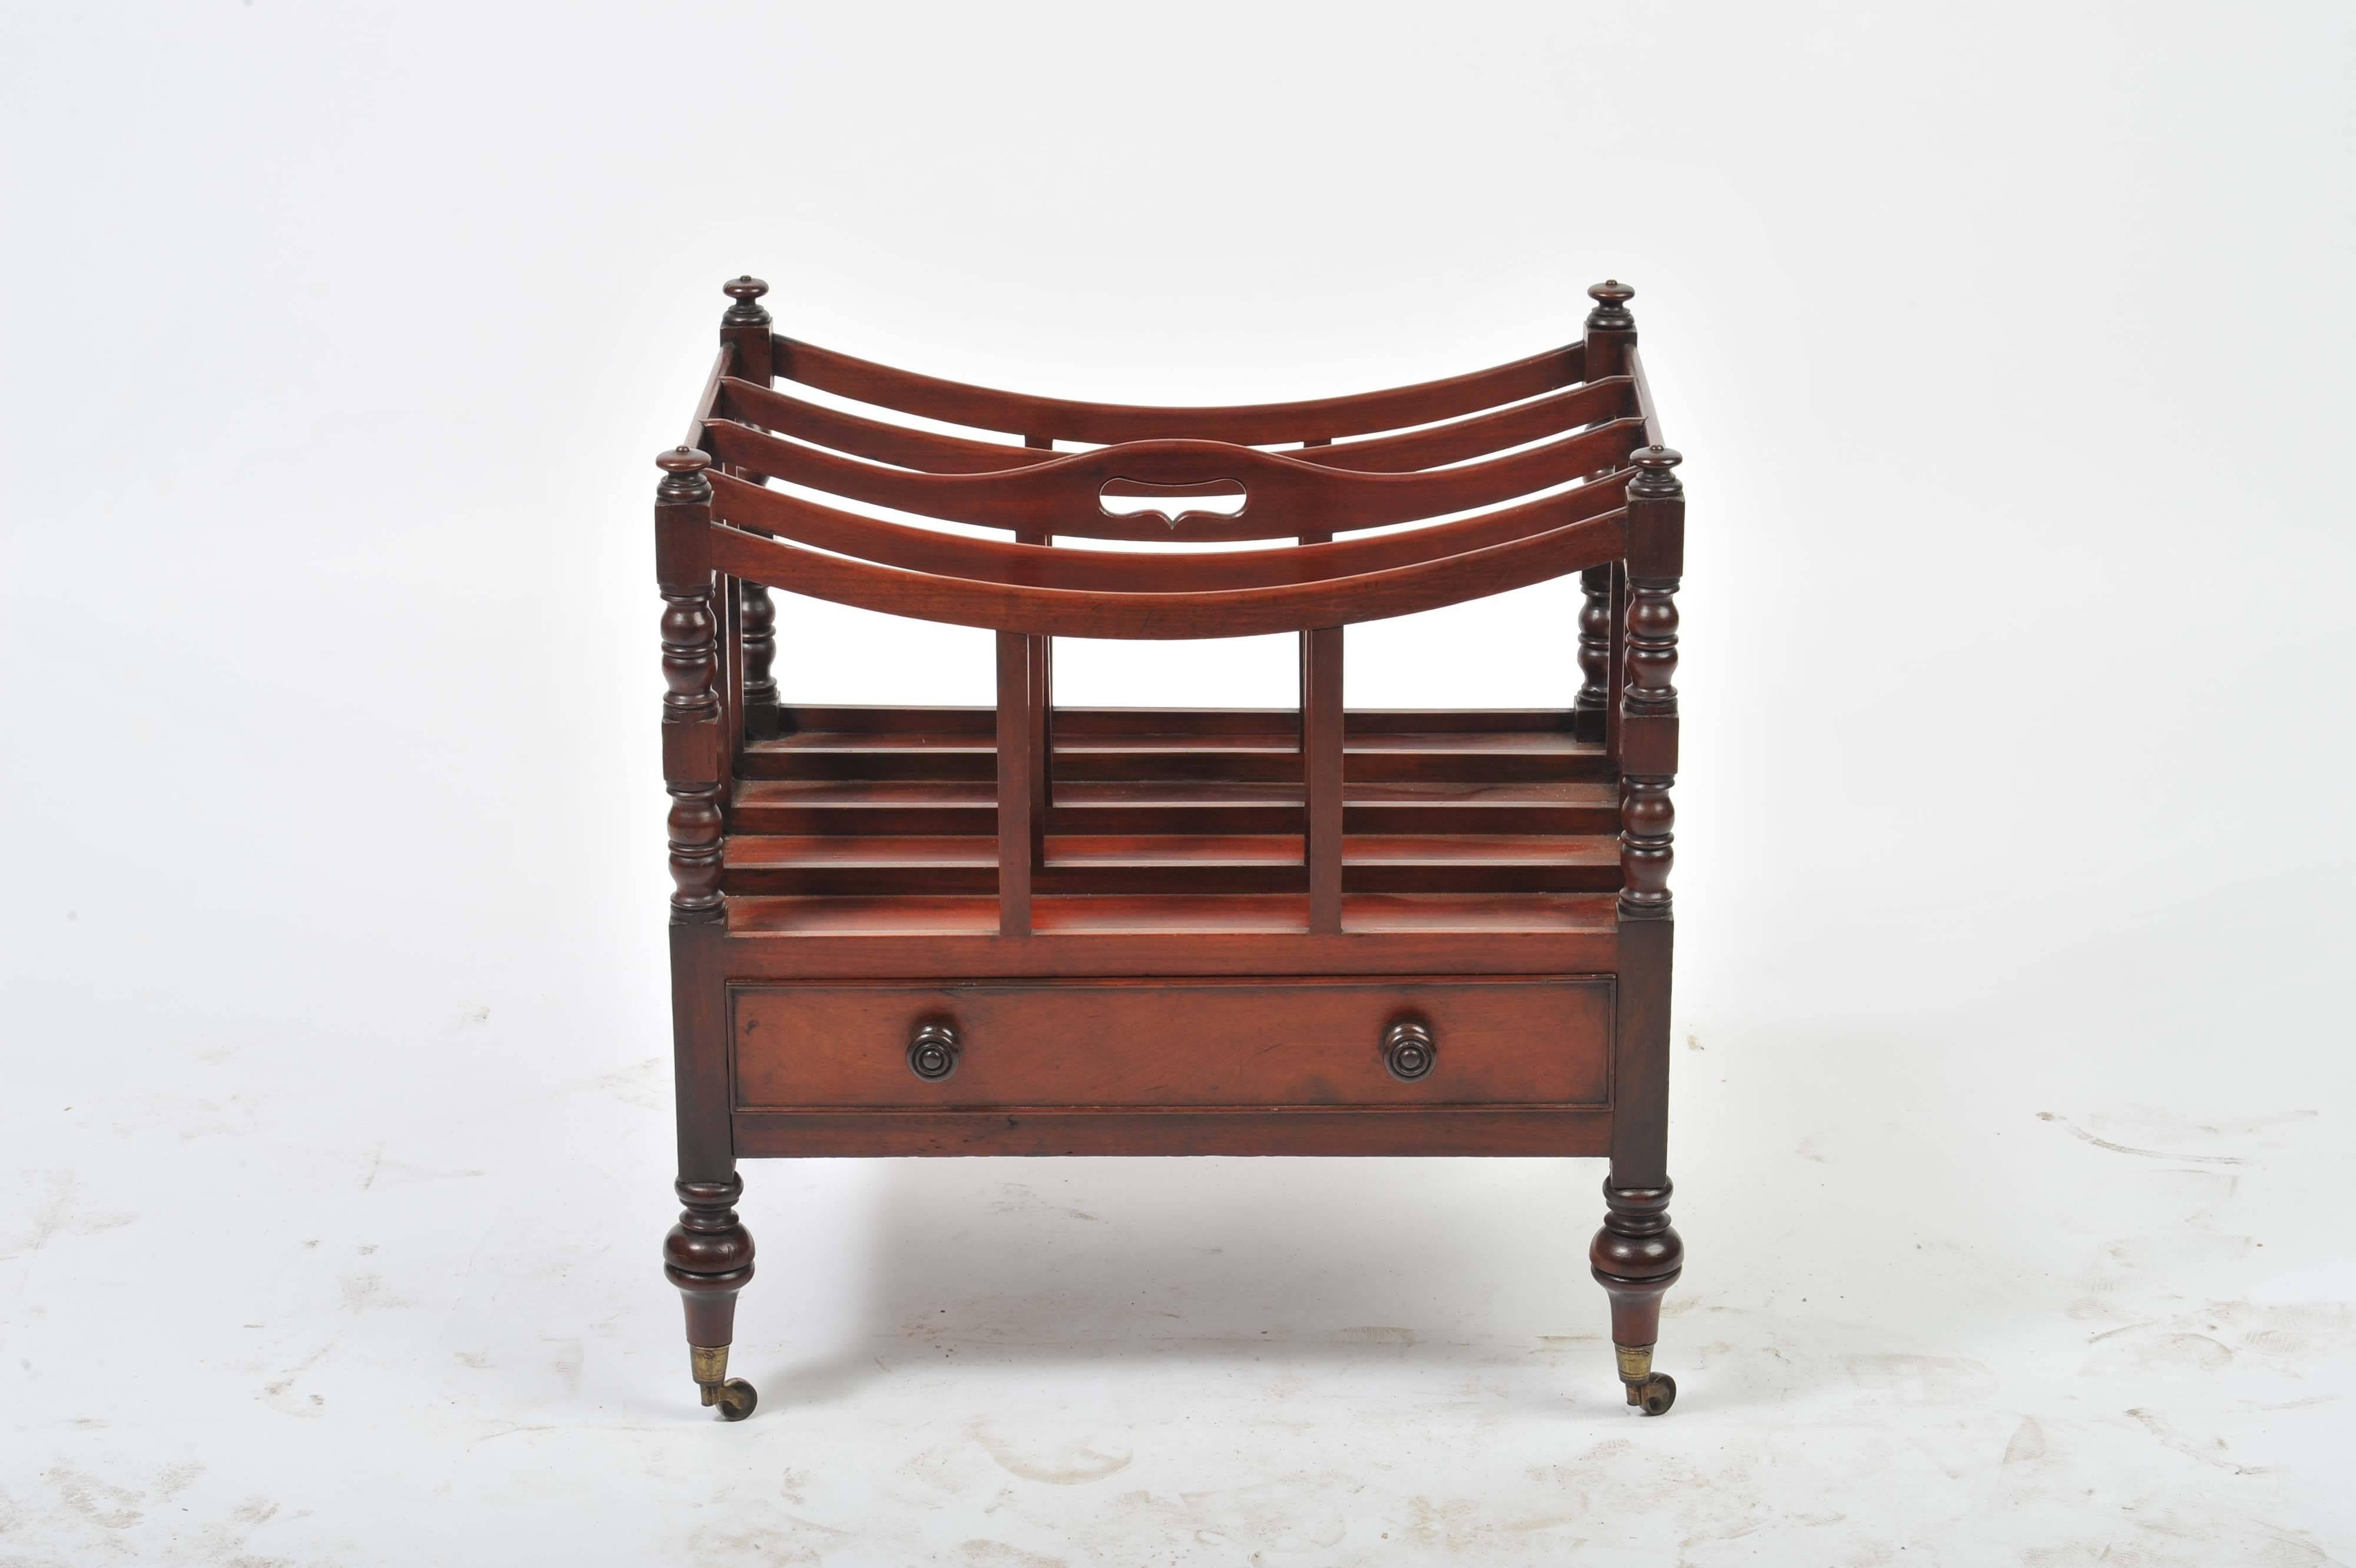 A good quality Regency period Mahogany four division canterbury, having a single drawer and raised on turned tapering legs with the original brass castors.